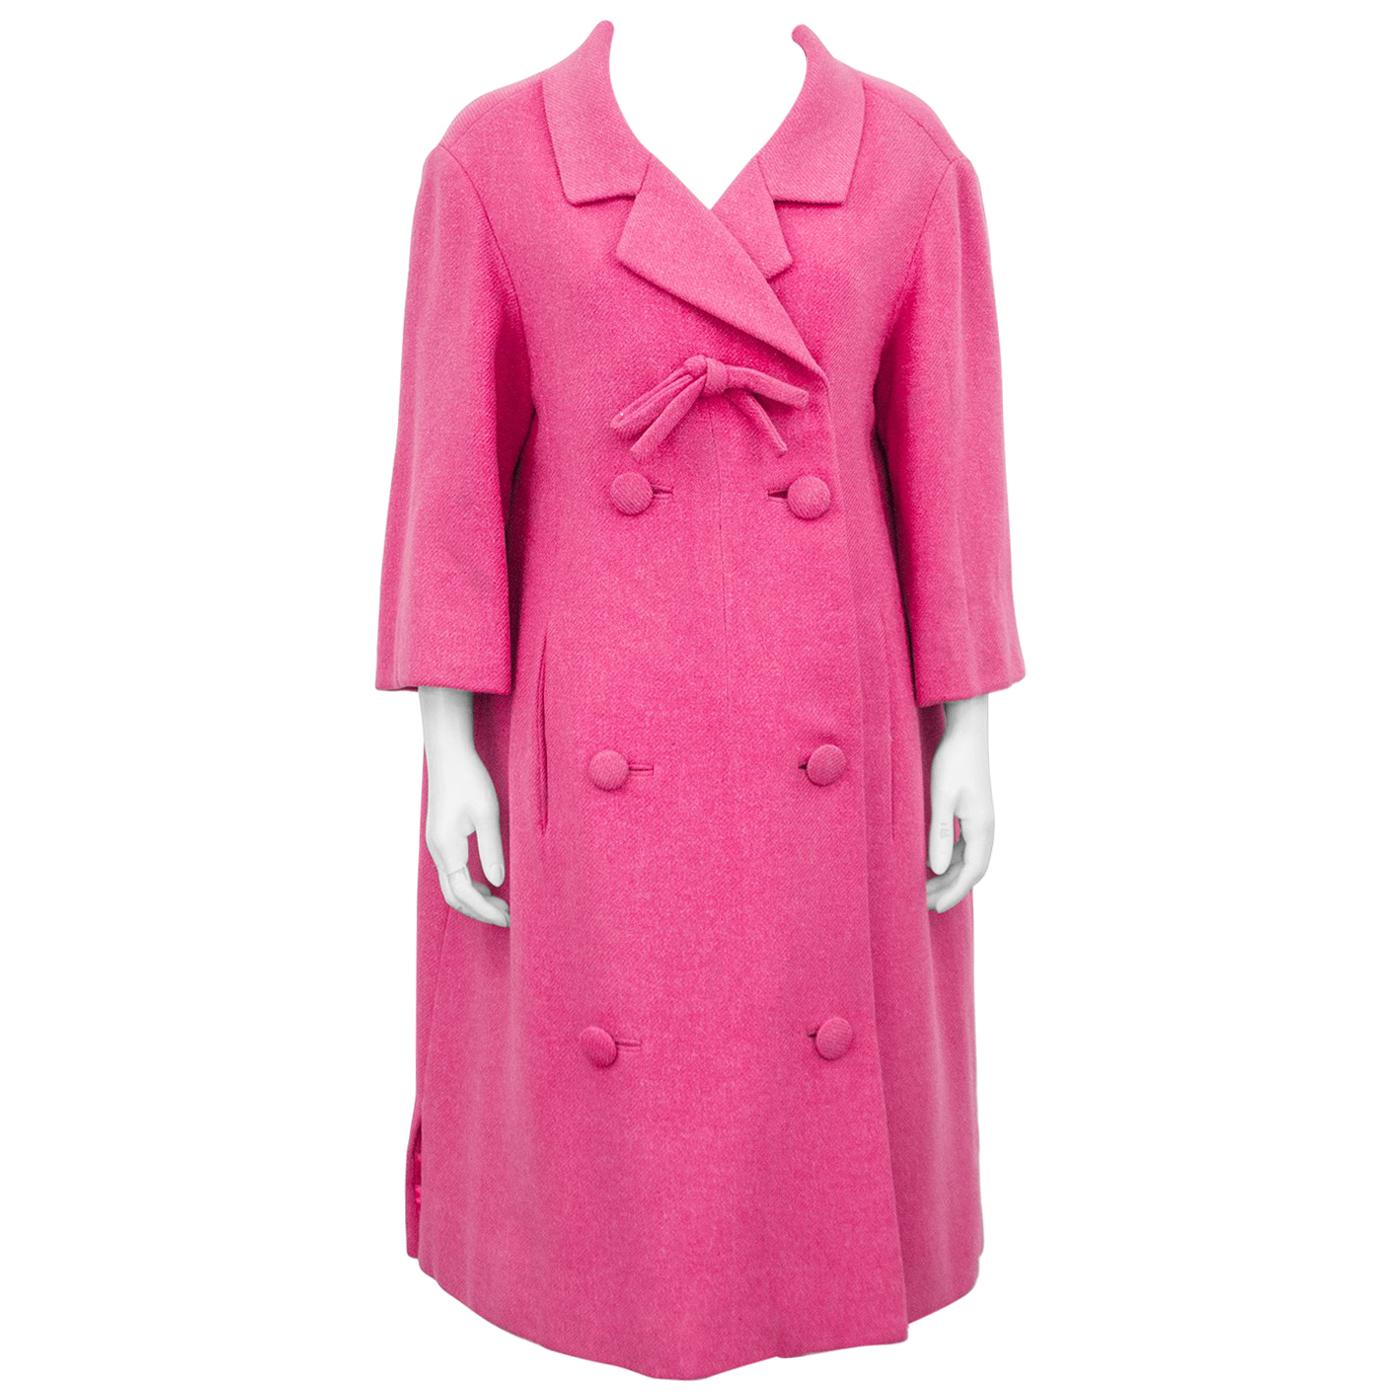 1959 Spring Collection Christian Dior Pink Wool Haute Couture Coat